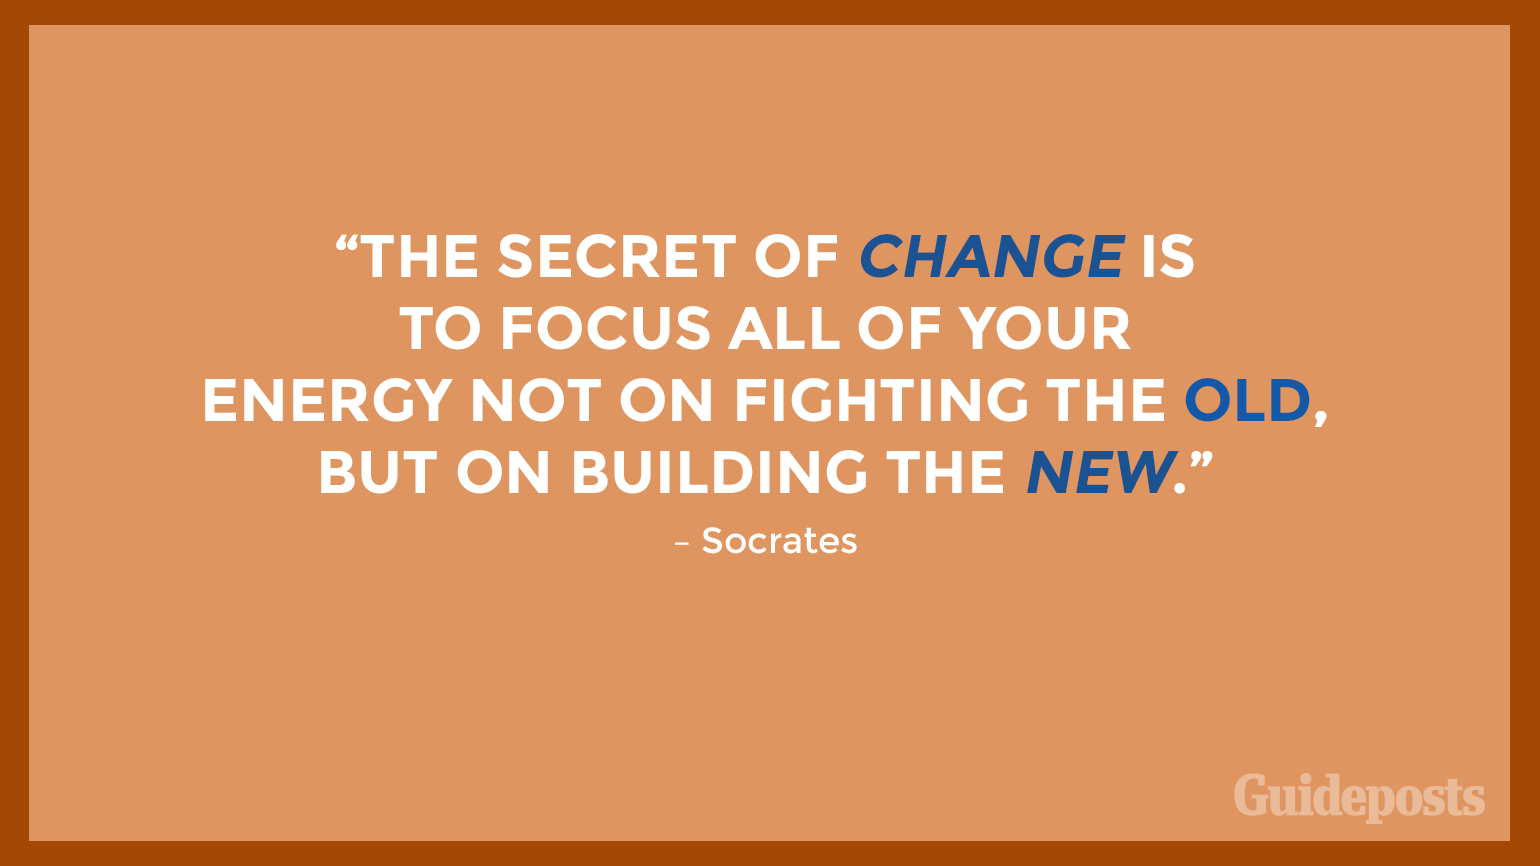 “The secret of change is to focus all of your energy not on fighting the old, but on building the new.” – Socrates